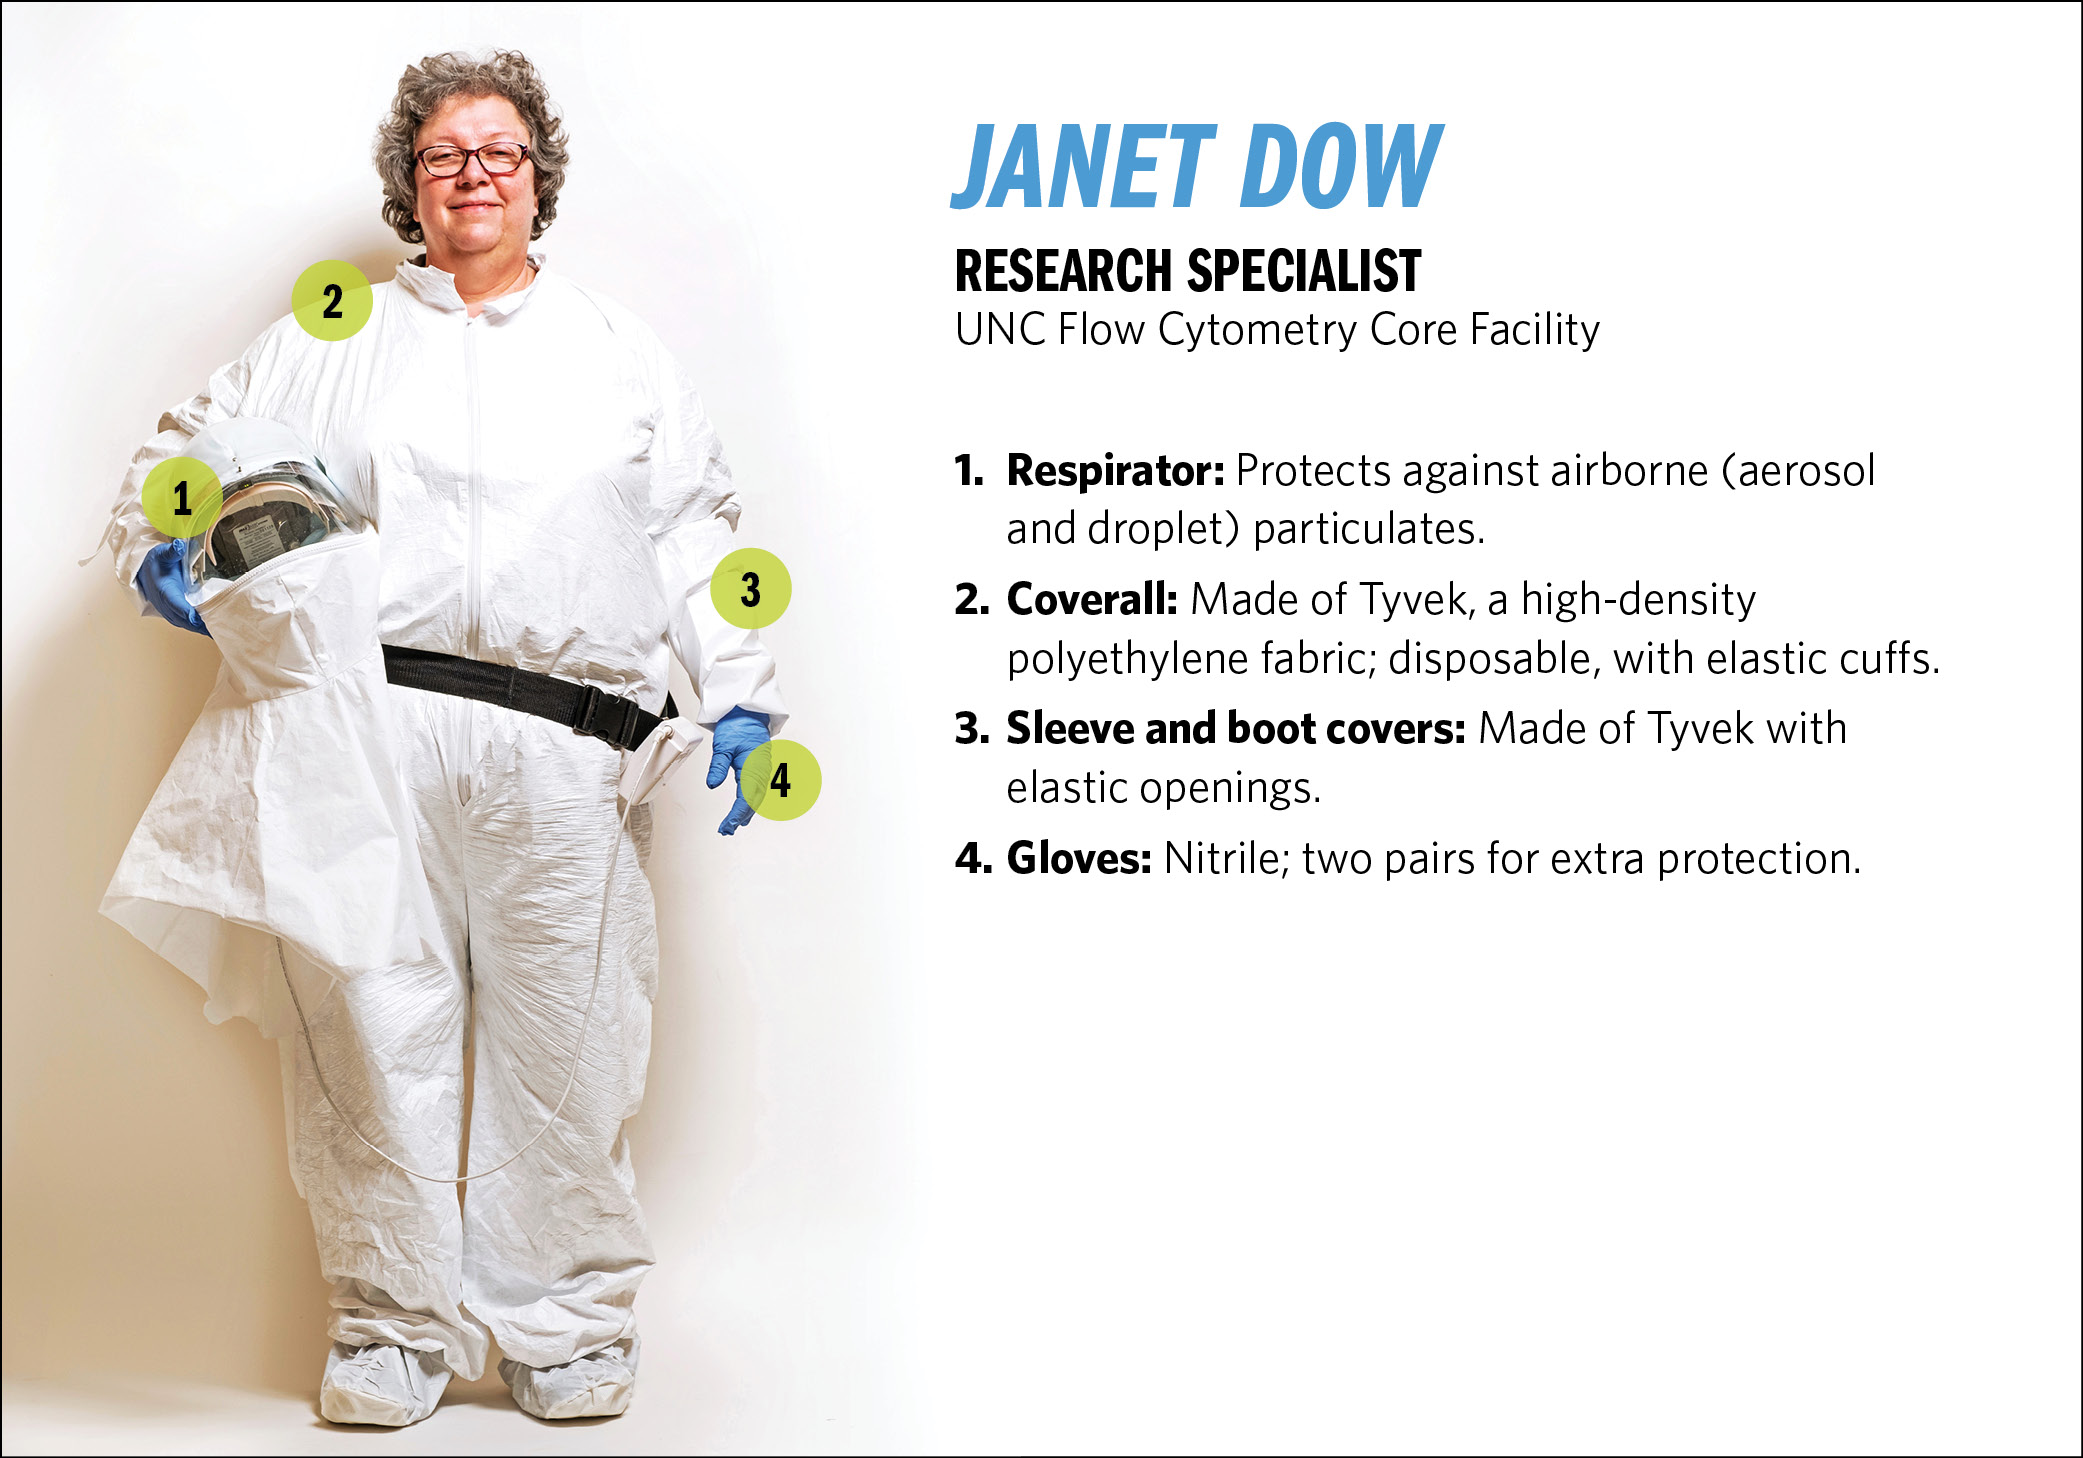 Research specialist Janet Dow, Flow Cytometry Core Facility. Tyvek hazmat coverall, sleeve and boot covers; two pairs of nitrile gloves; respirator on face.